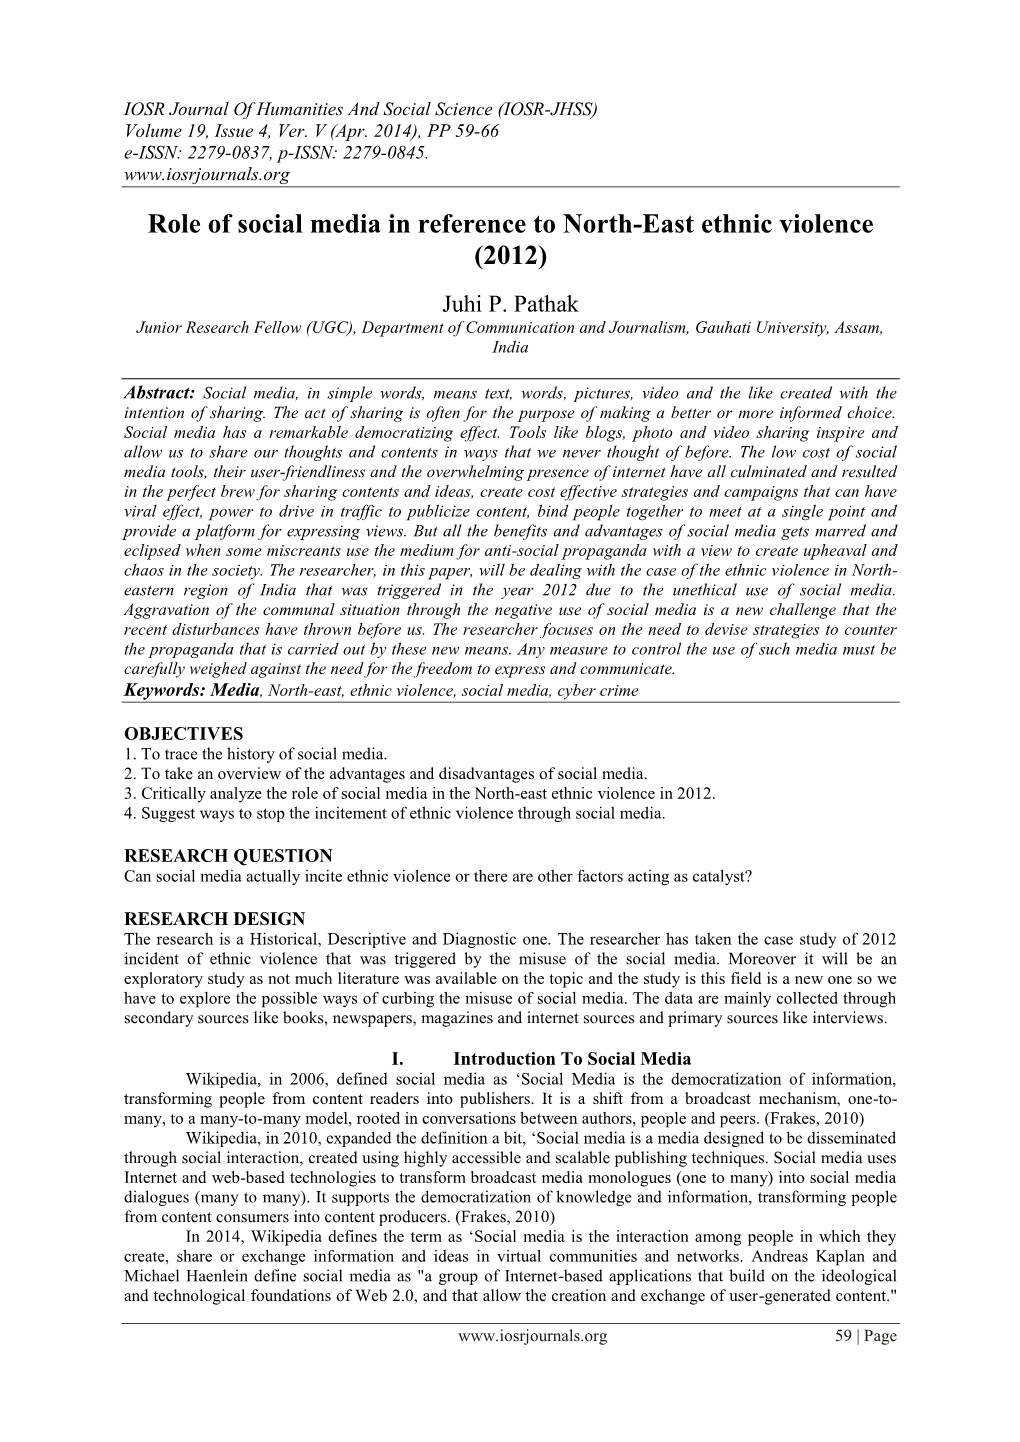 Role of Social Media in Reference to North-East Ethnic Violence (2012)